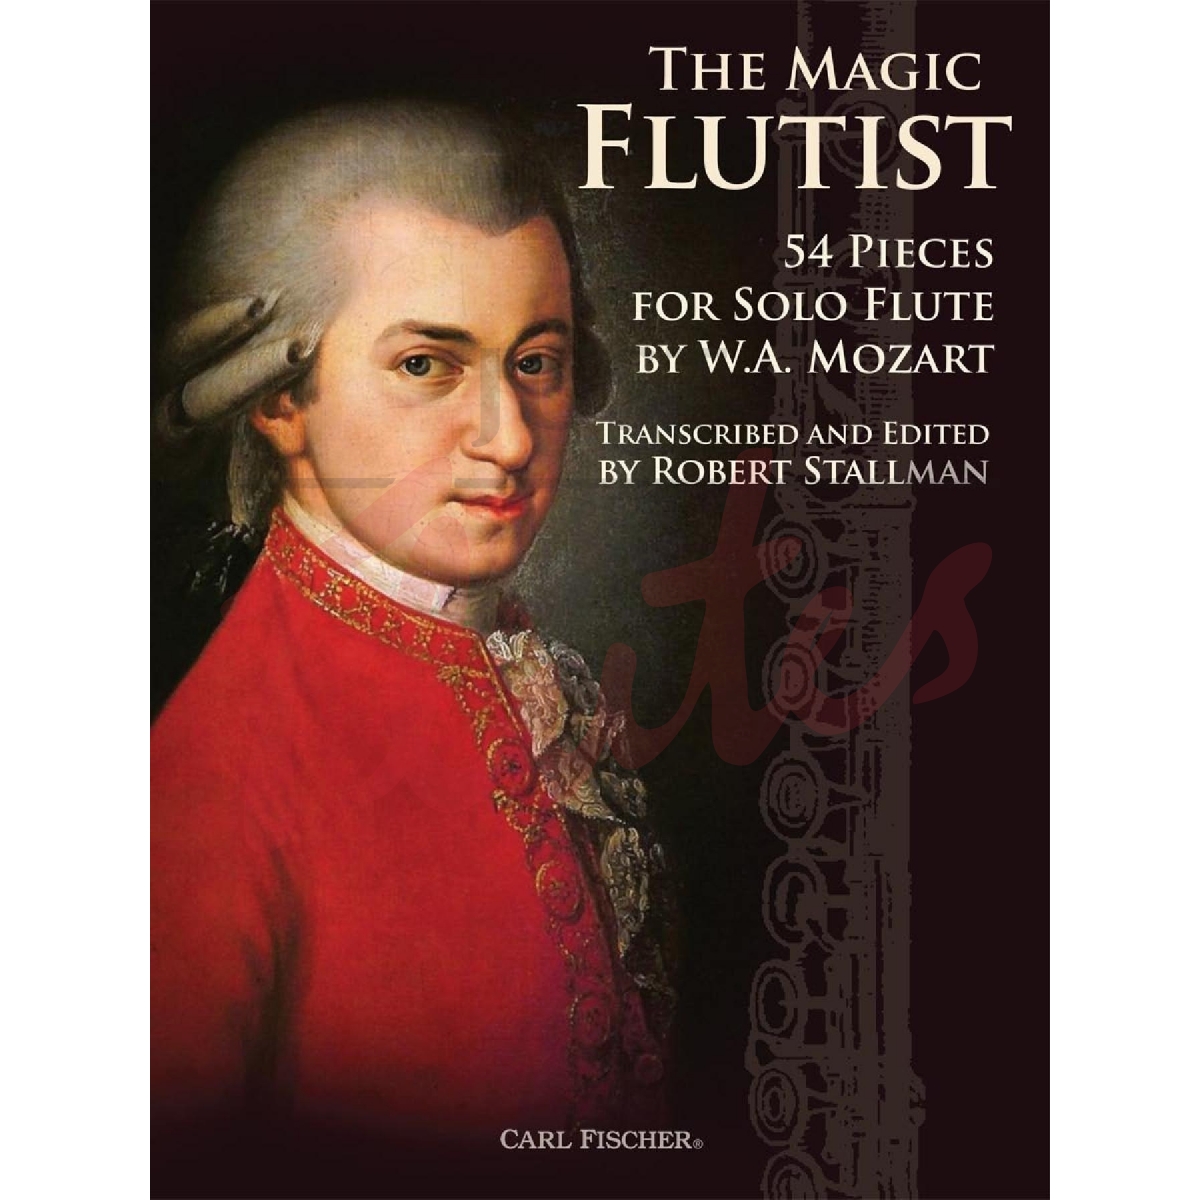 The Magic Flutist Vol. 1: 51 Pieces for Solo Flute from the Chamber Music of WA Mozart